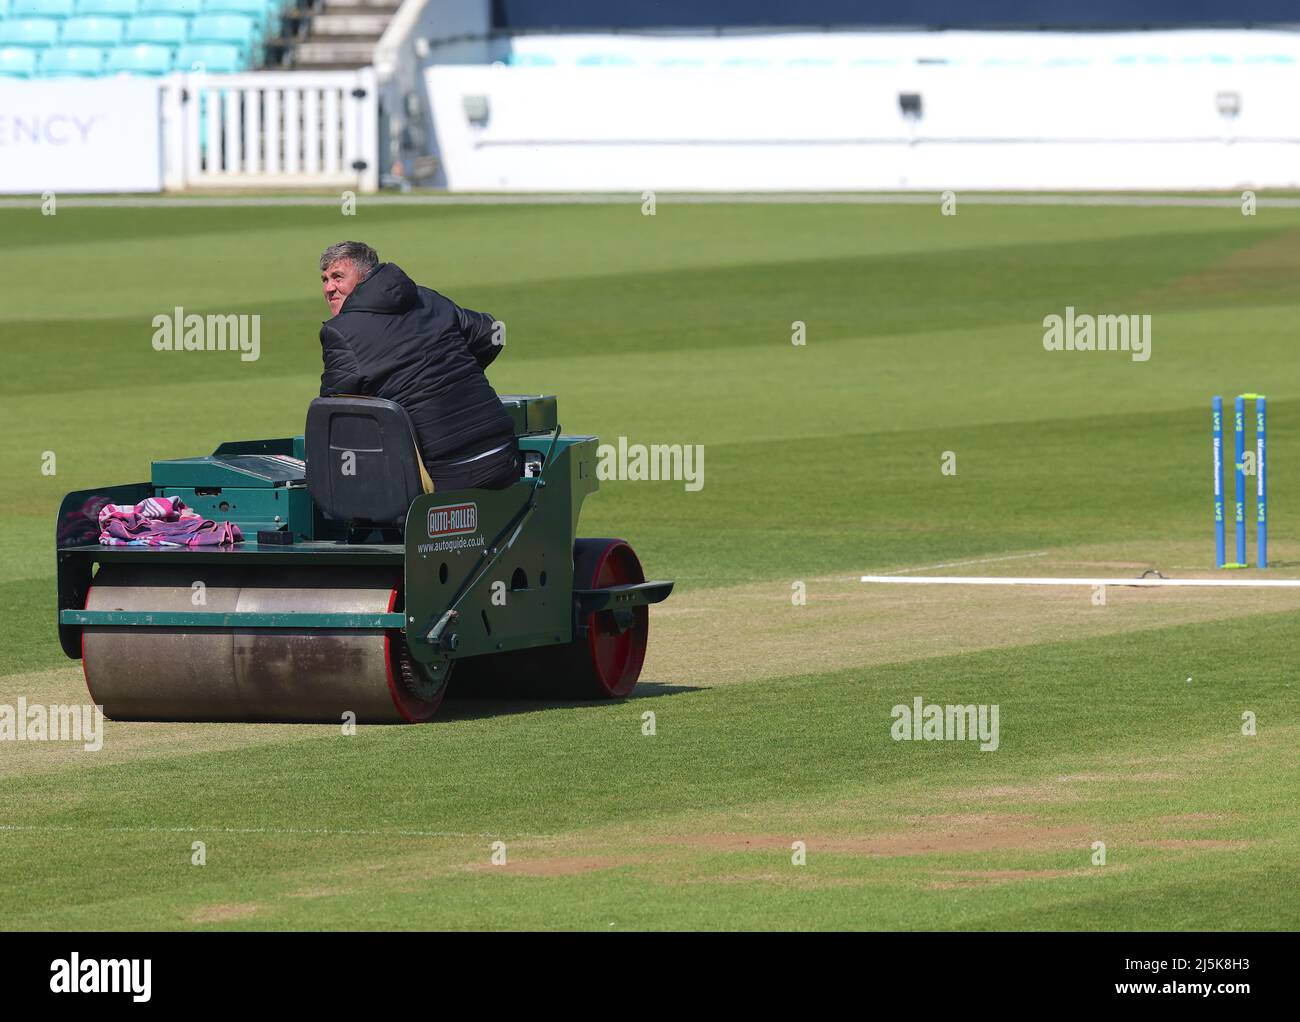 24 April, 2022. London, UK. Grounds staff using the heavy roller between innings as Surrey take on Somerset in the County Championship at the Kia Oval, day four. David Rowe/Alamy Live News Stock Photo